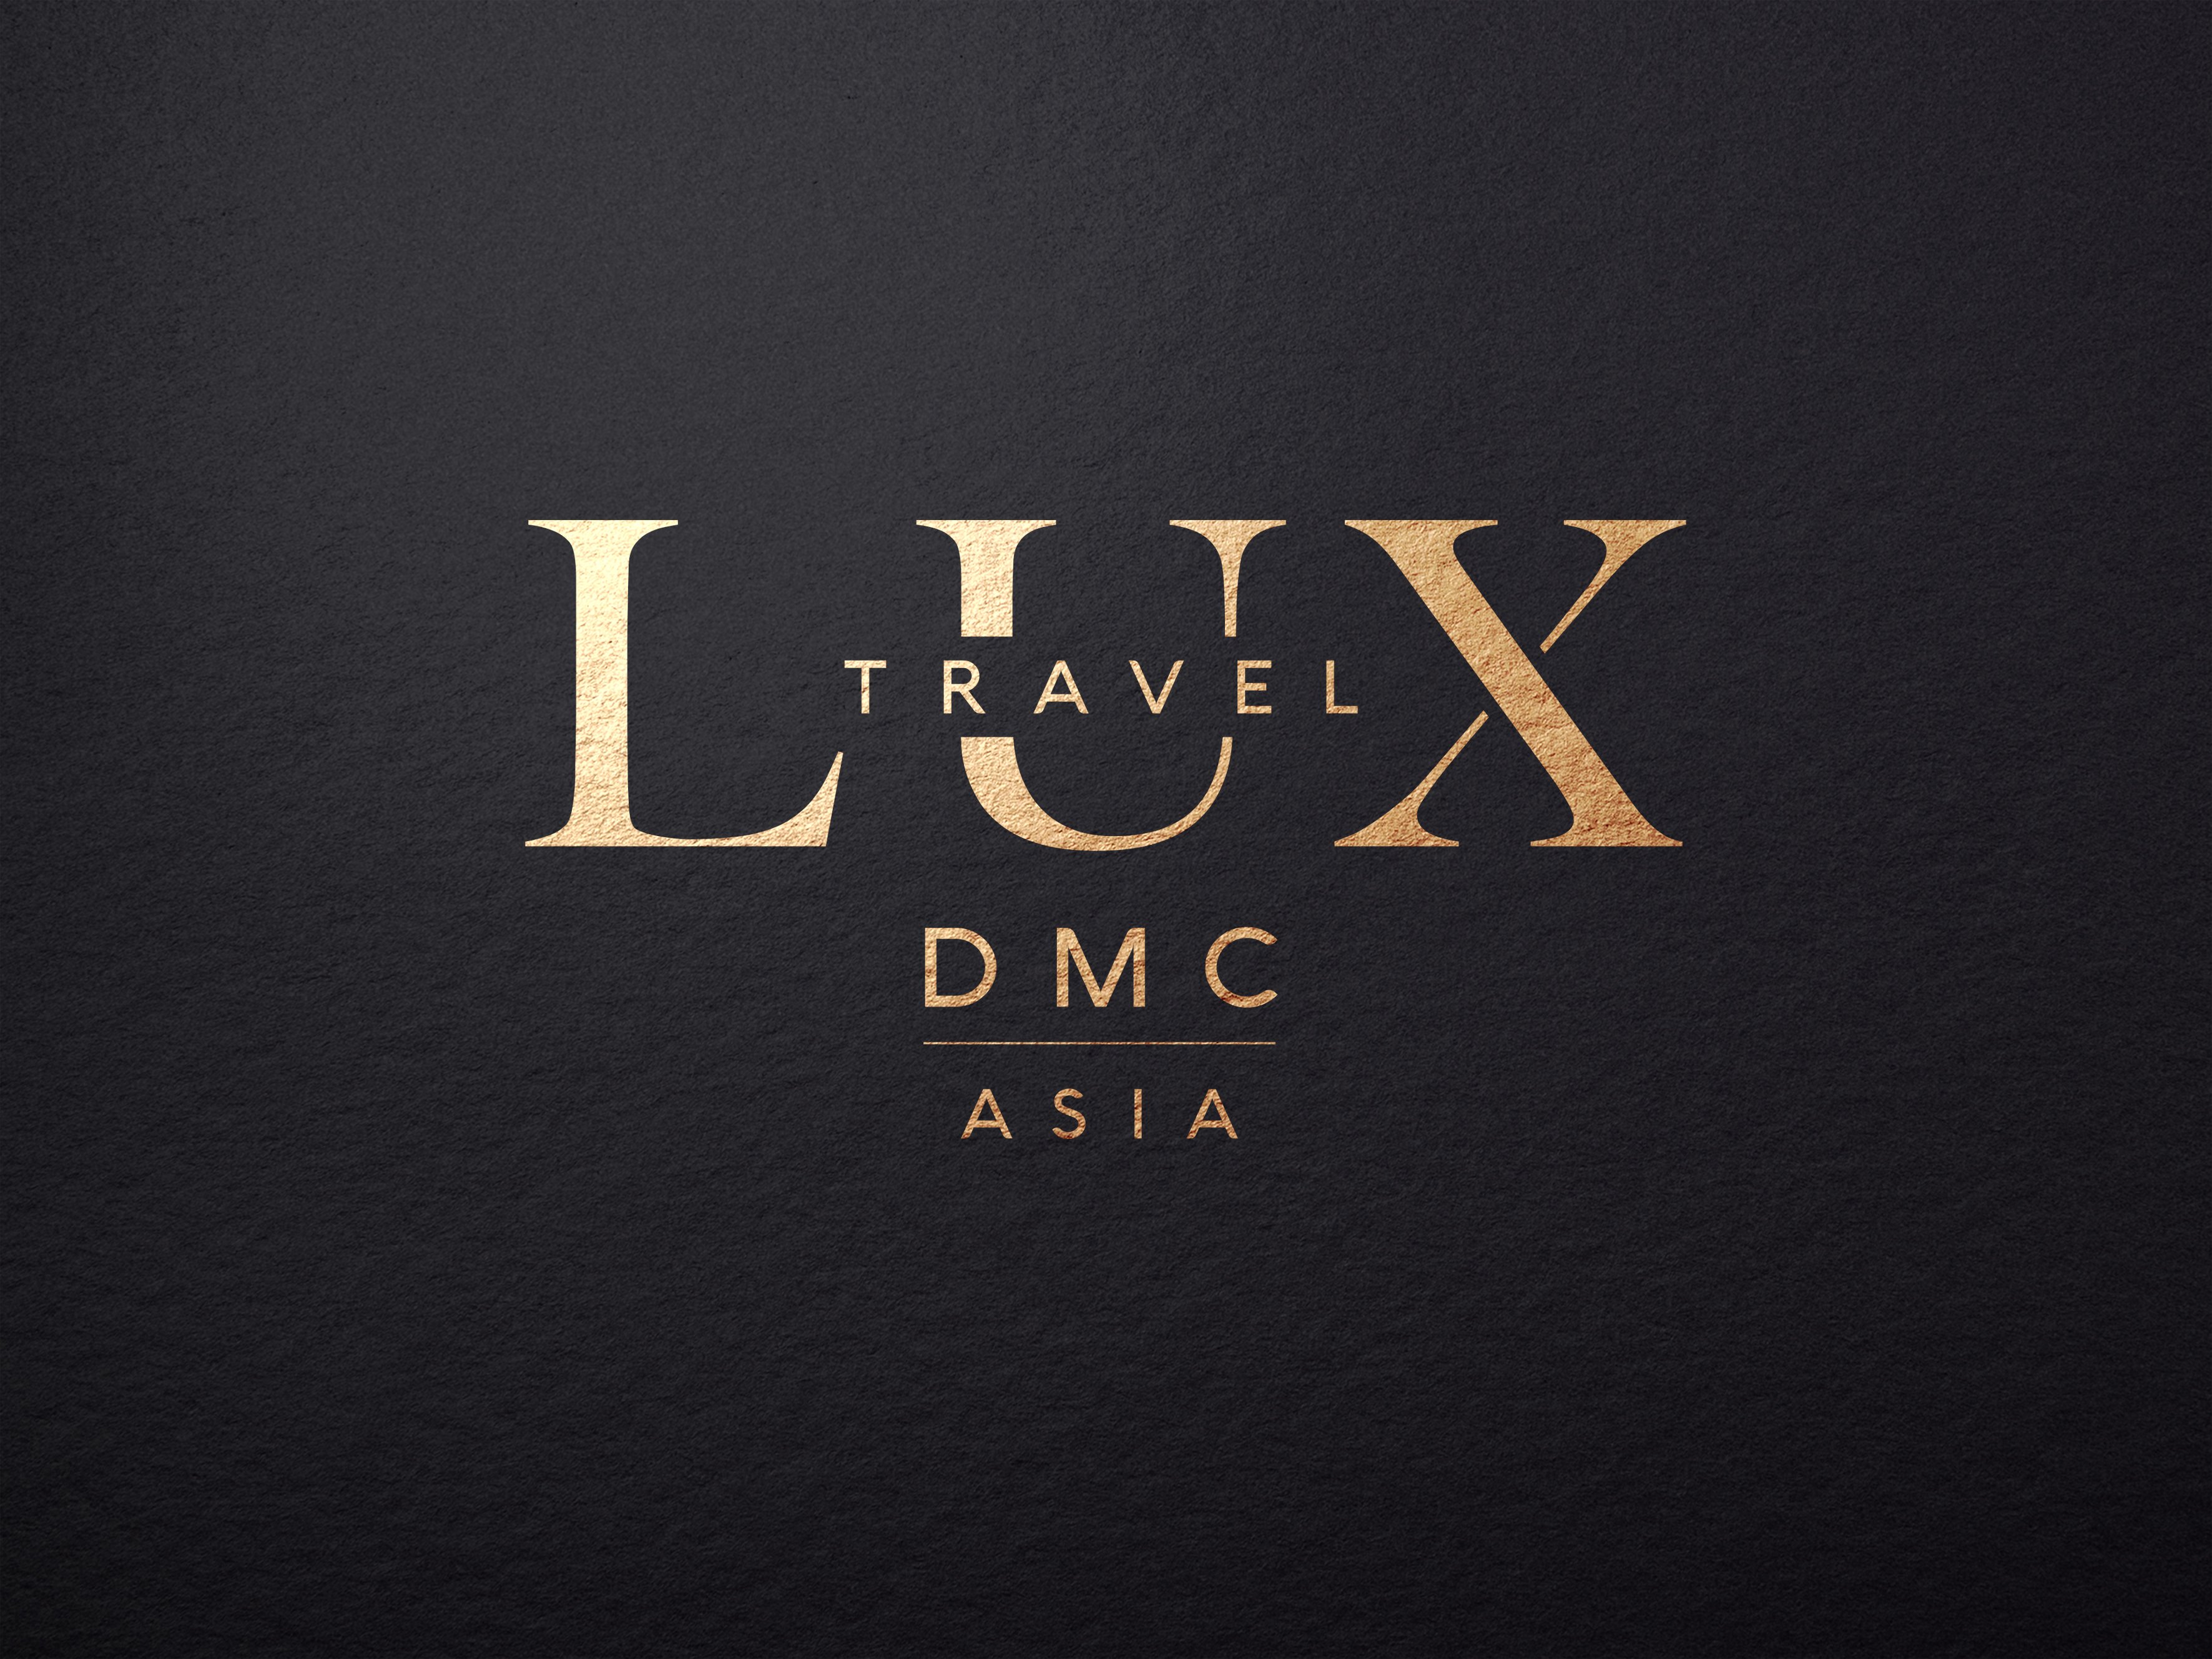 Vietnam’s First Luxury Travel Company Has Re-Branded to Lux Travel DMC for Asian Expansion and Announced Its New Website